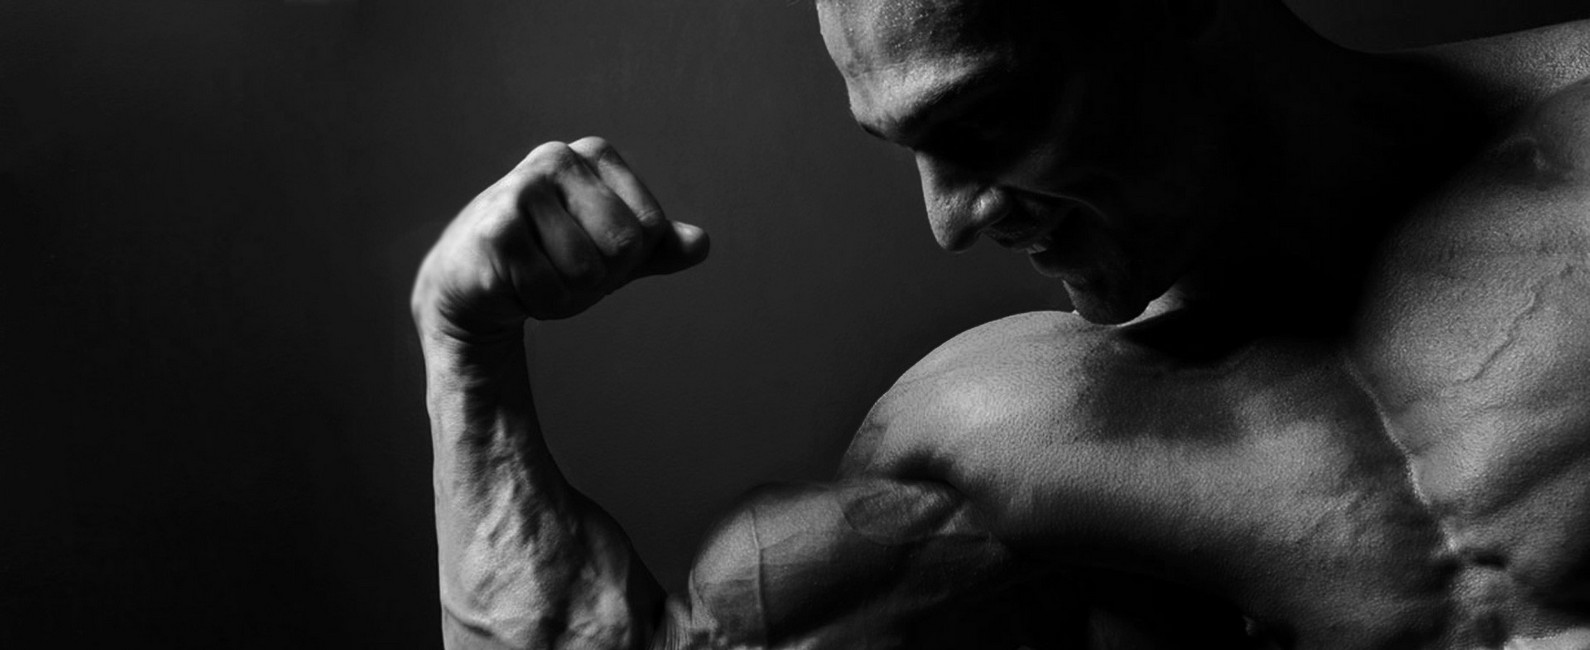 Does taking anabolic steroids lower your immune system